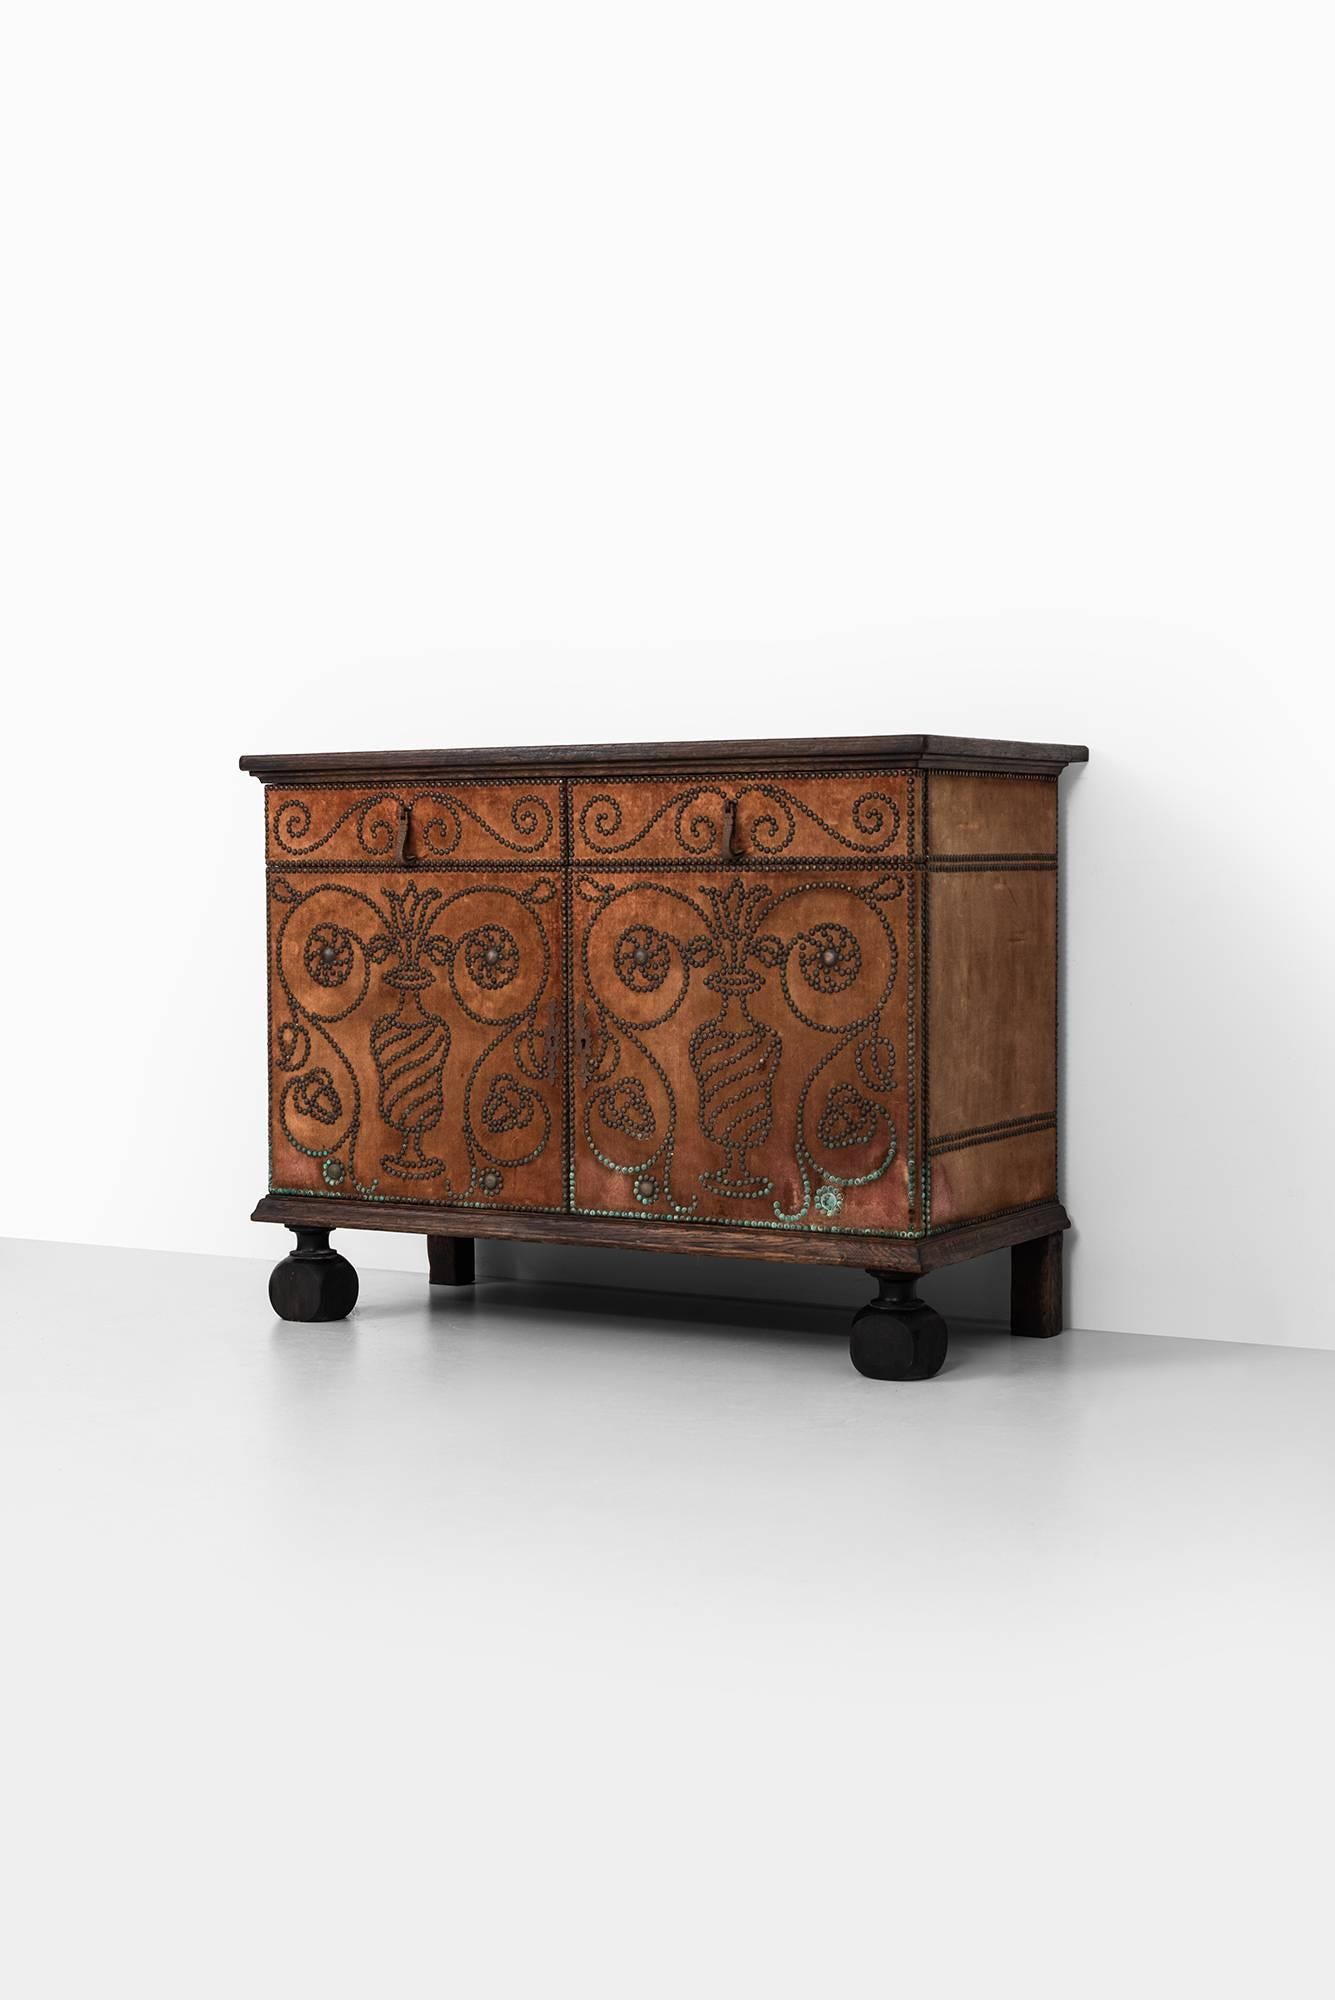 Bopoint Cabinet Attributed to Otto Schulz and Probably Produced by Boet 1